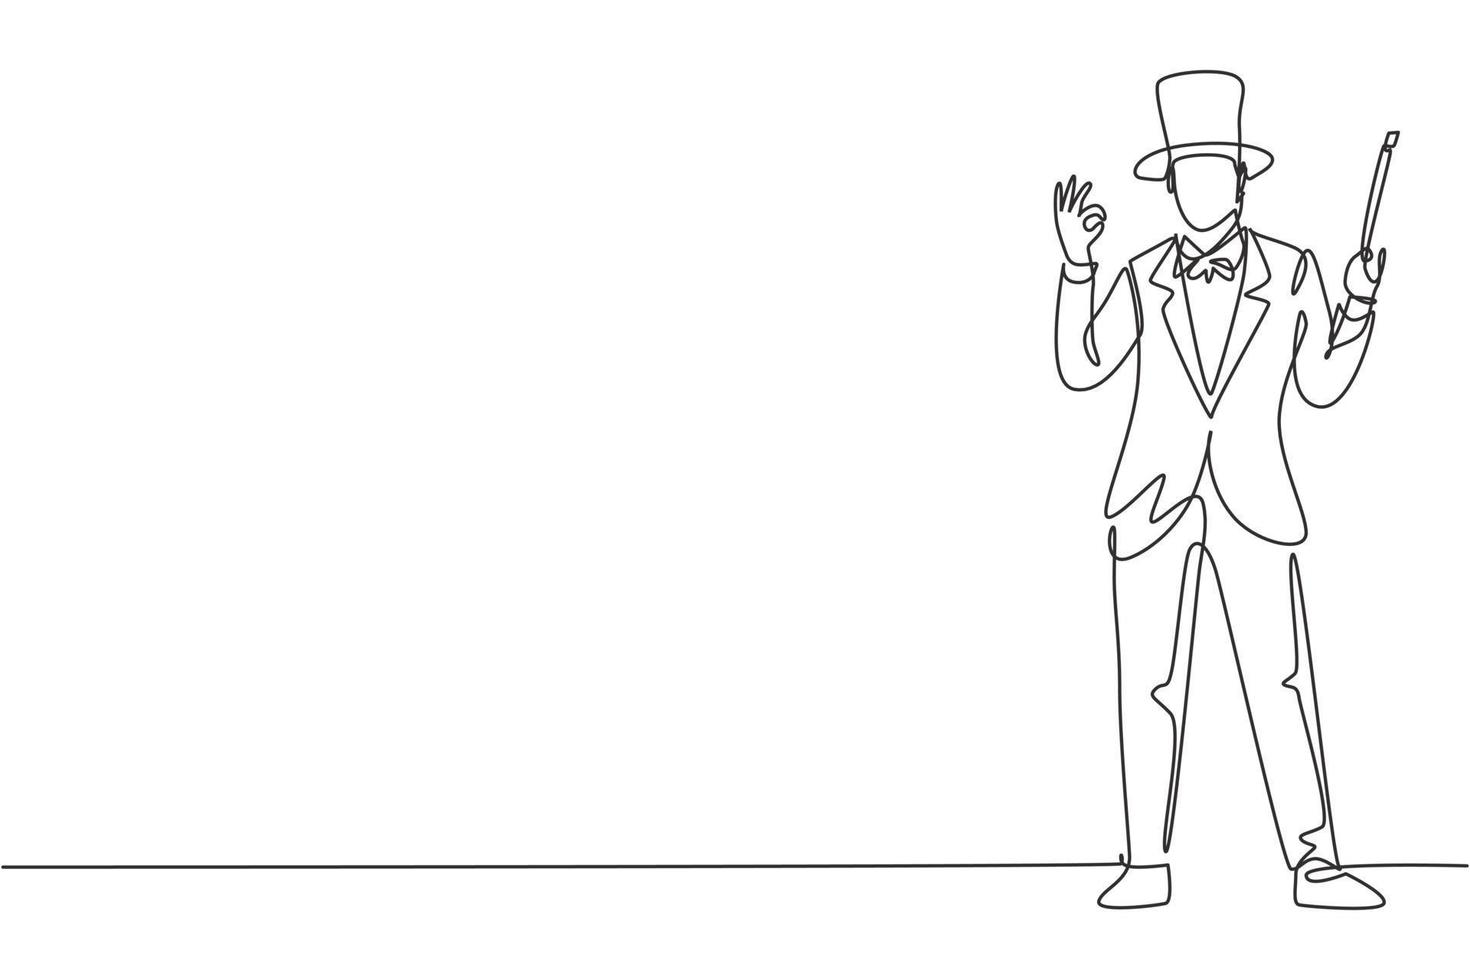 Continuous one line drawing magician stands with gesture okay wearing hat and holding magic wand performing tricks at circus show. Success business. Single line draw design vector graphic illustration